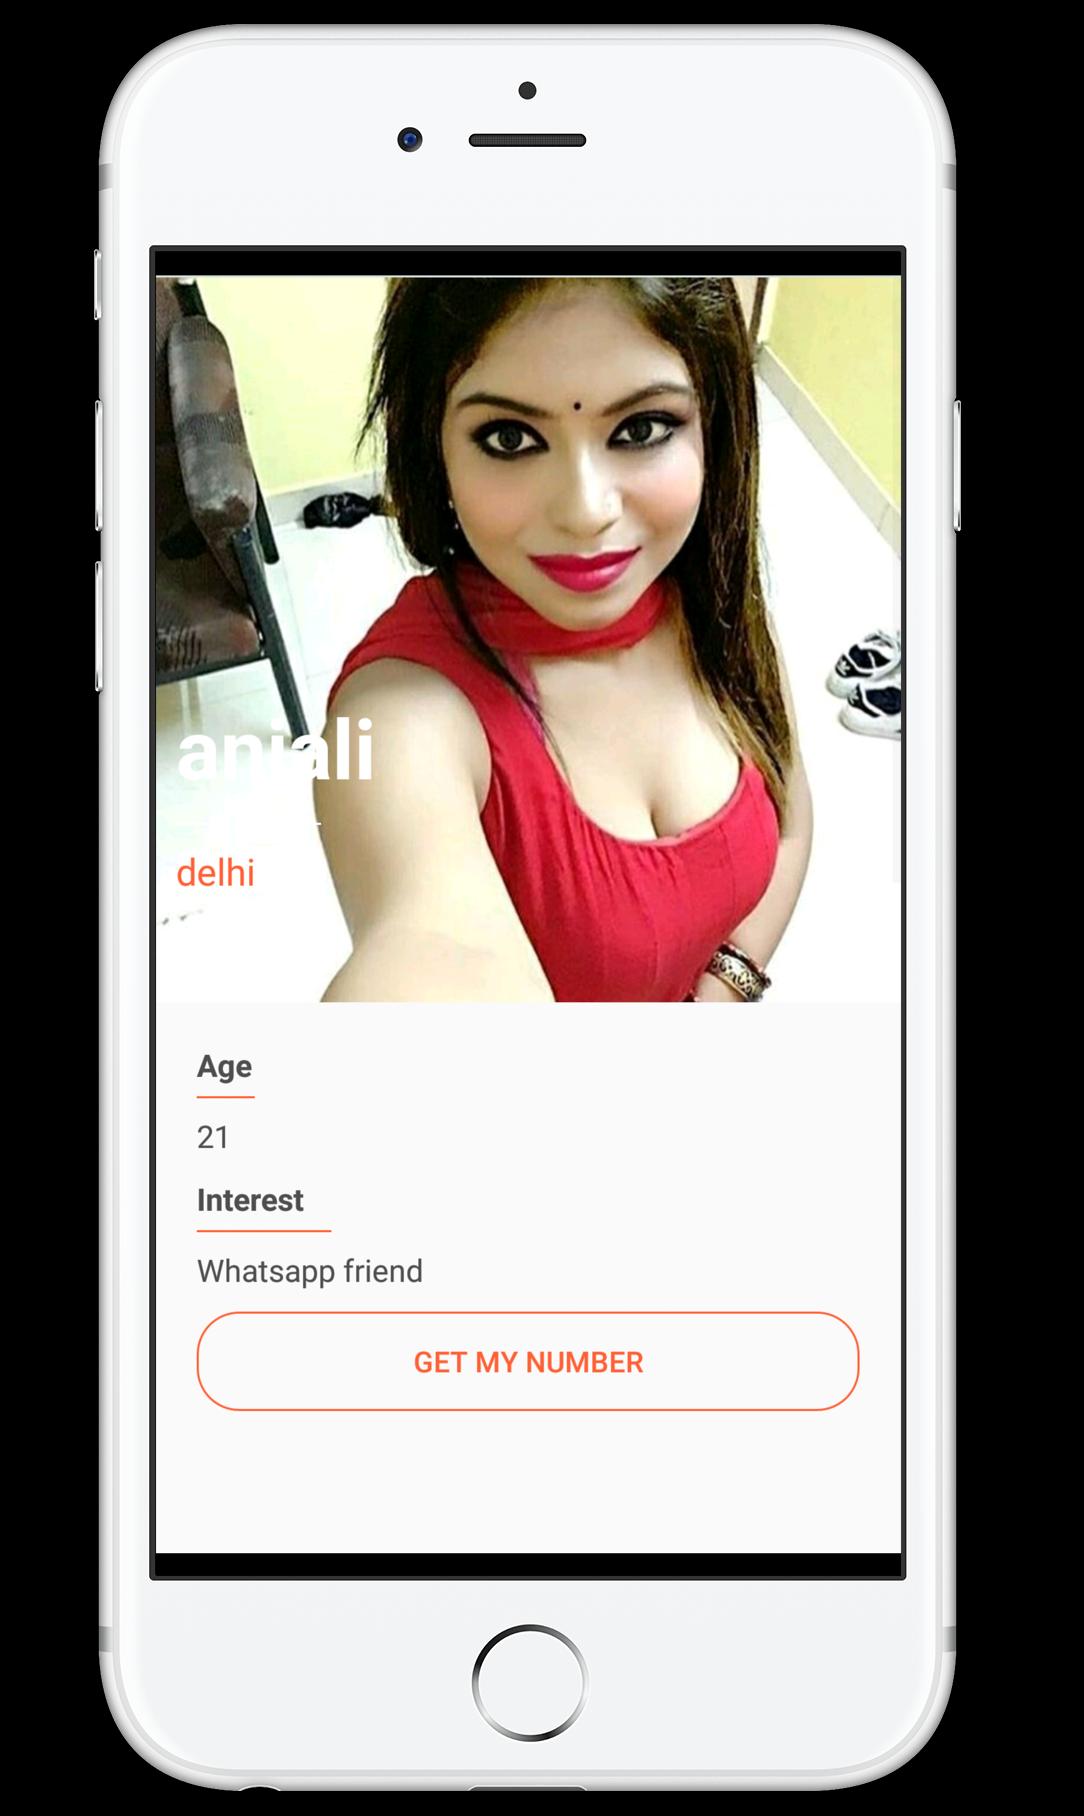 Girls with phone numbers ahead. article source. 